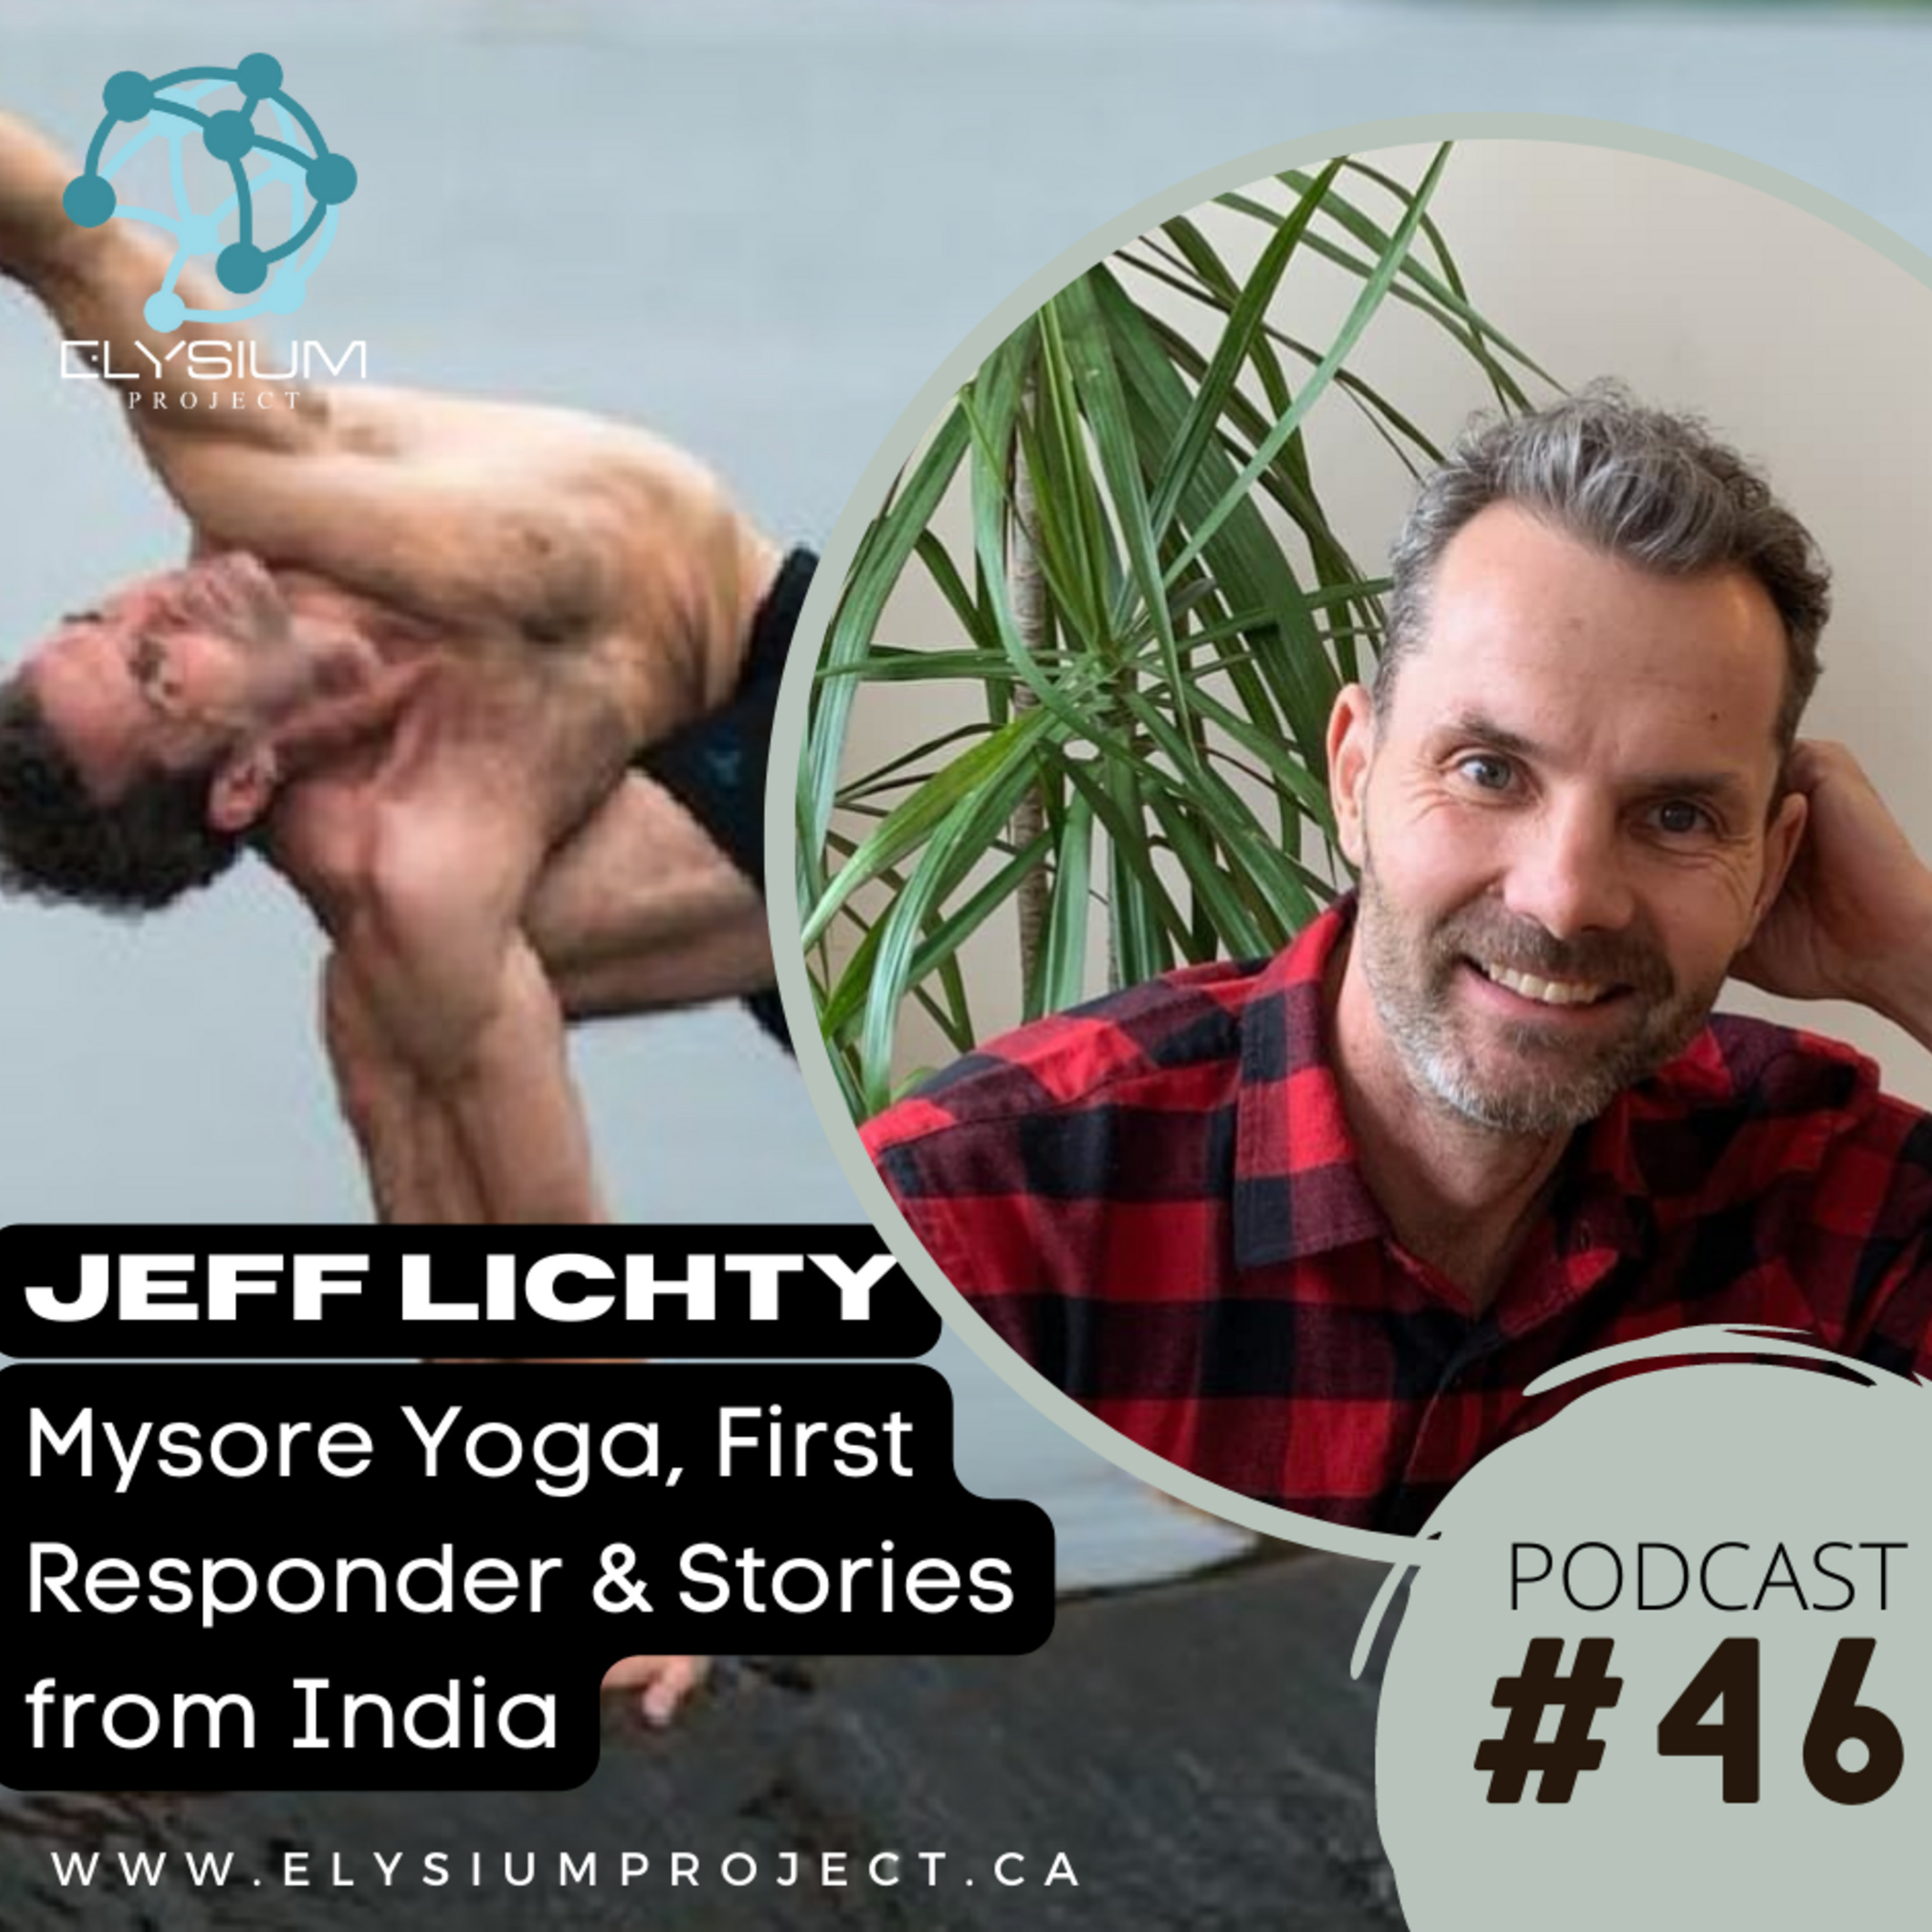 Episode 46: Mysore Yoga, First Responder, & Travels to India with Jeff Lichty